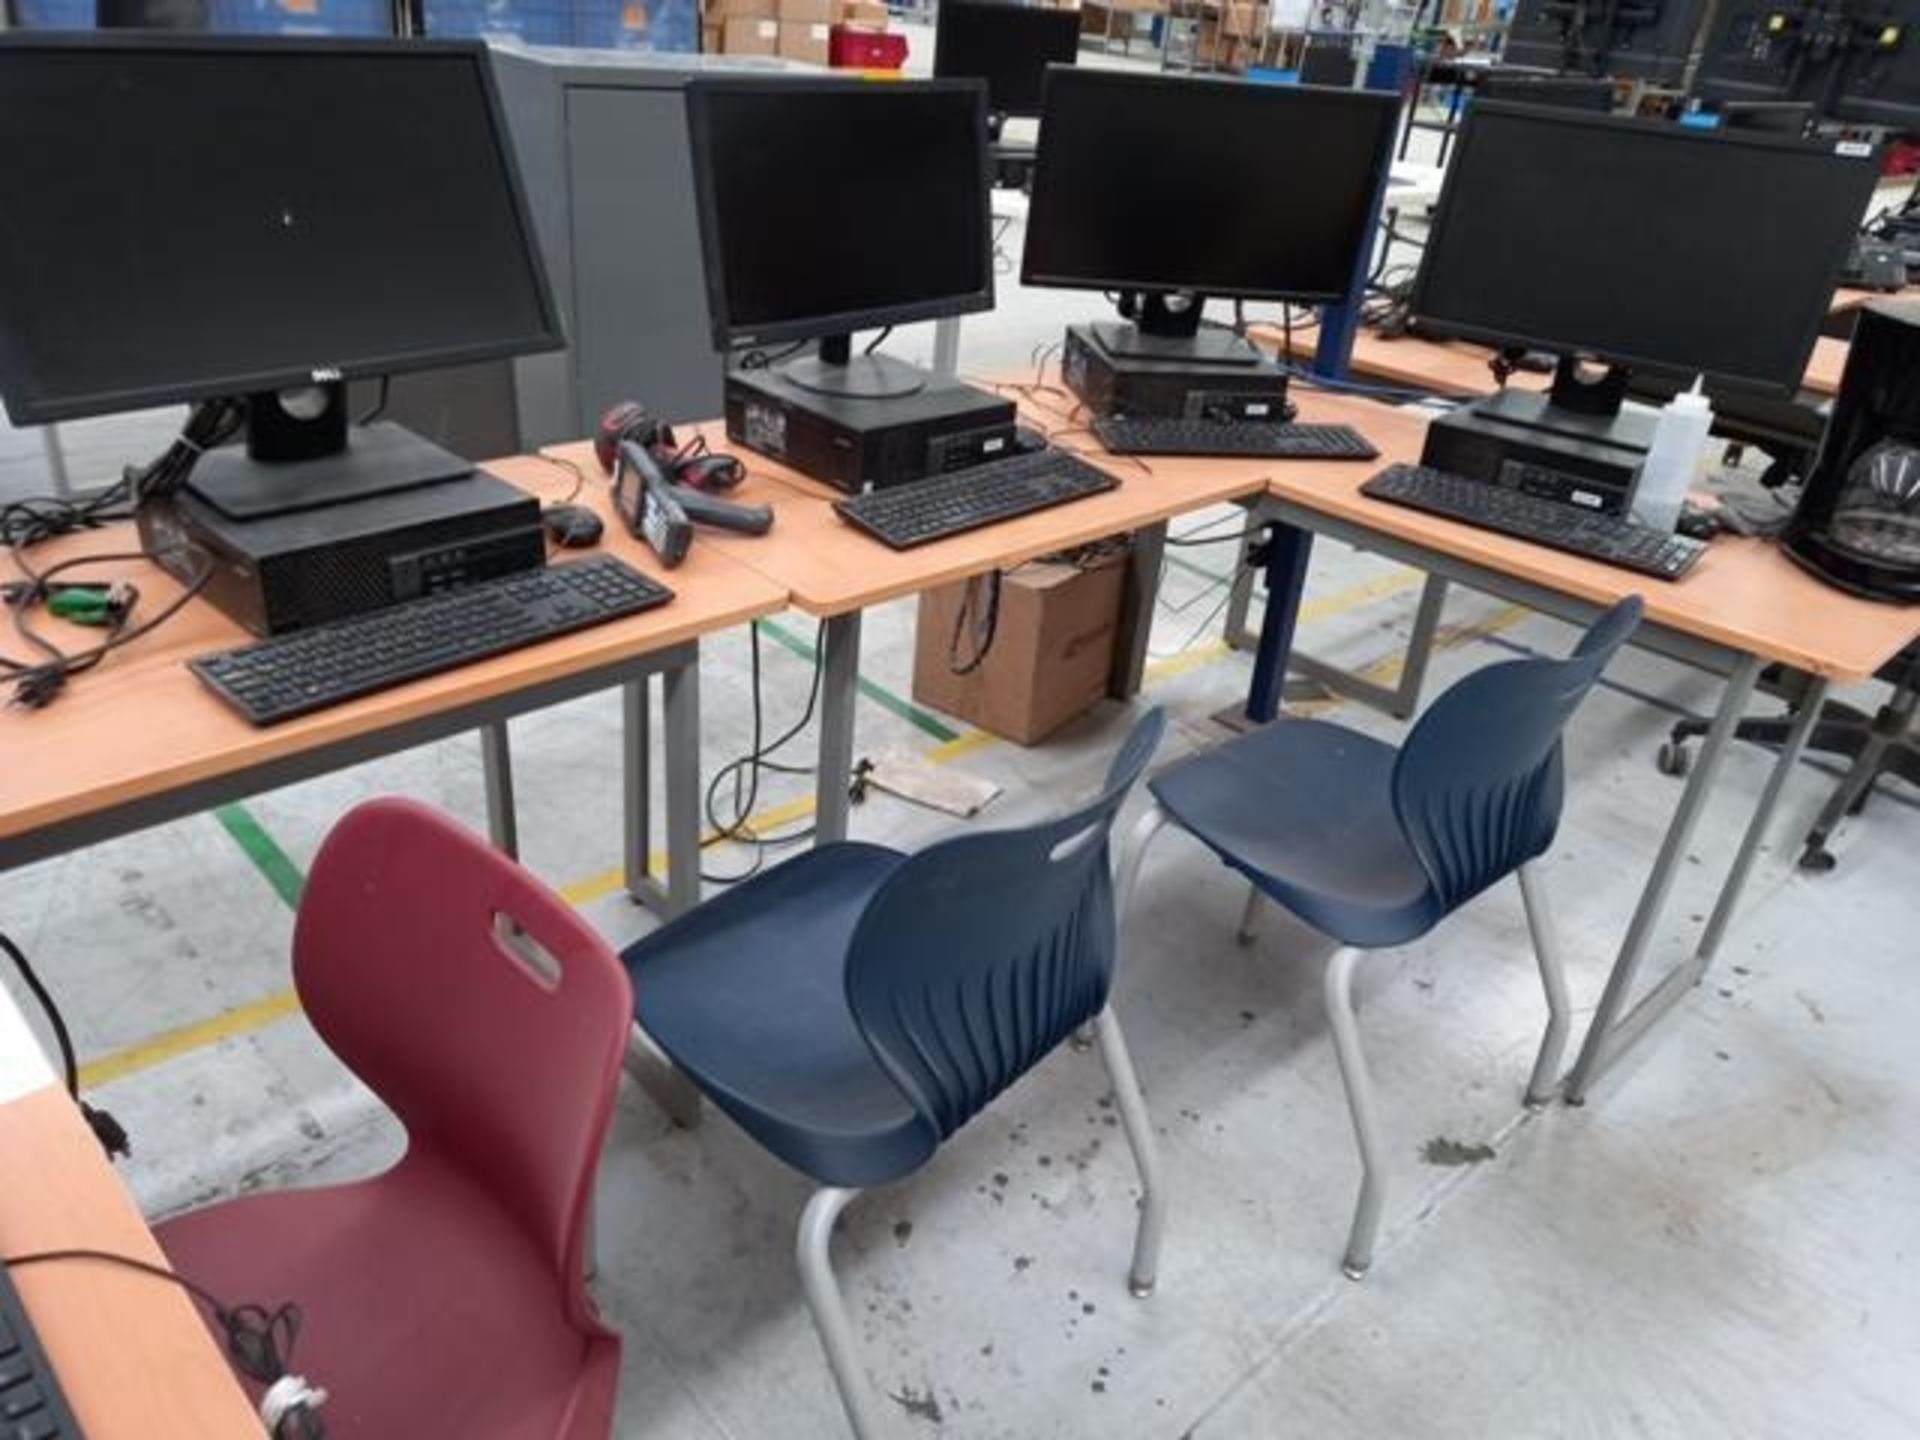 LOT: (66) Of Furniture and Computing Equipment Consisting of: Computers, Printers, Desks, Chairs, Dr - Image 10 of 38